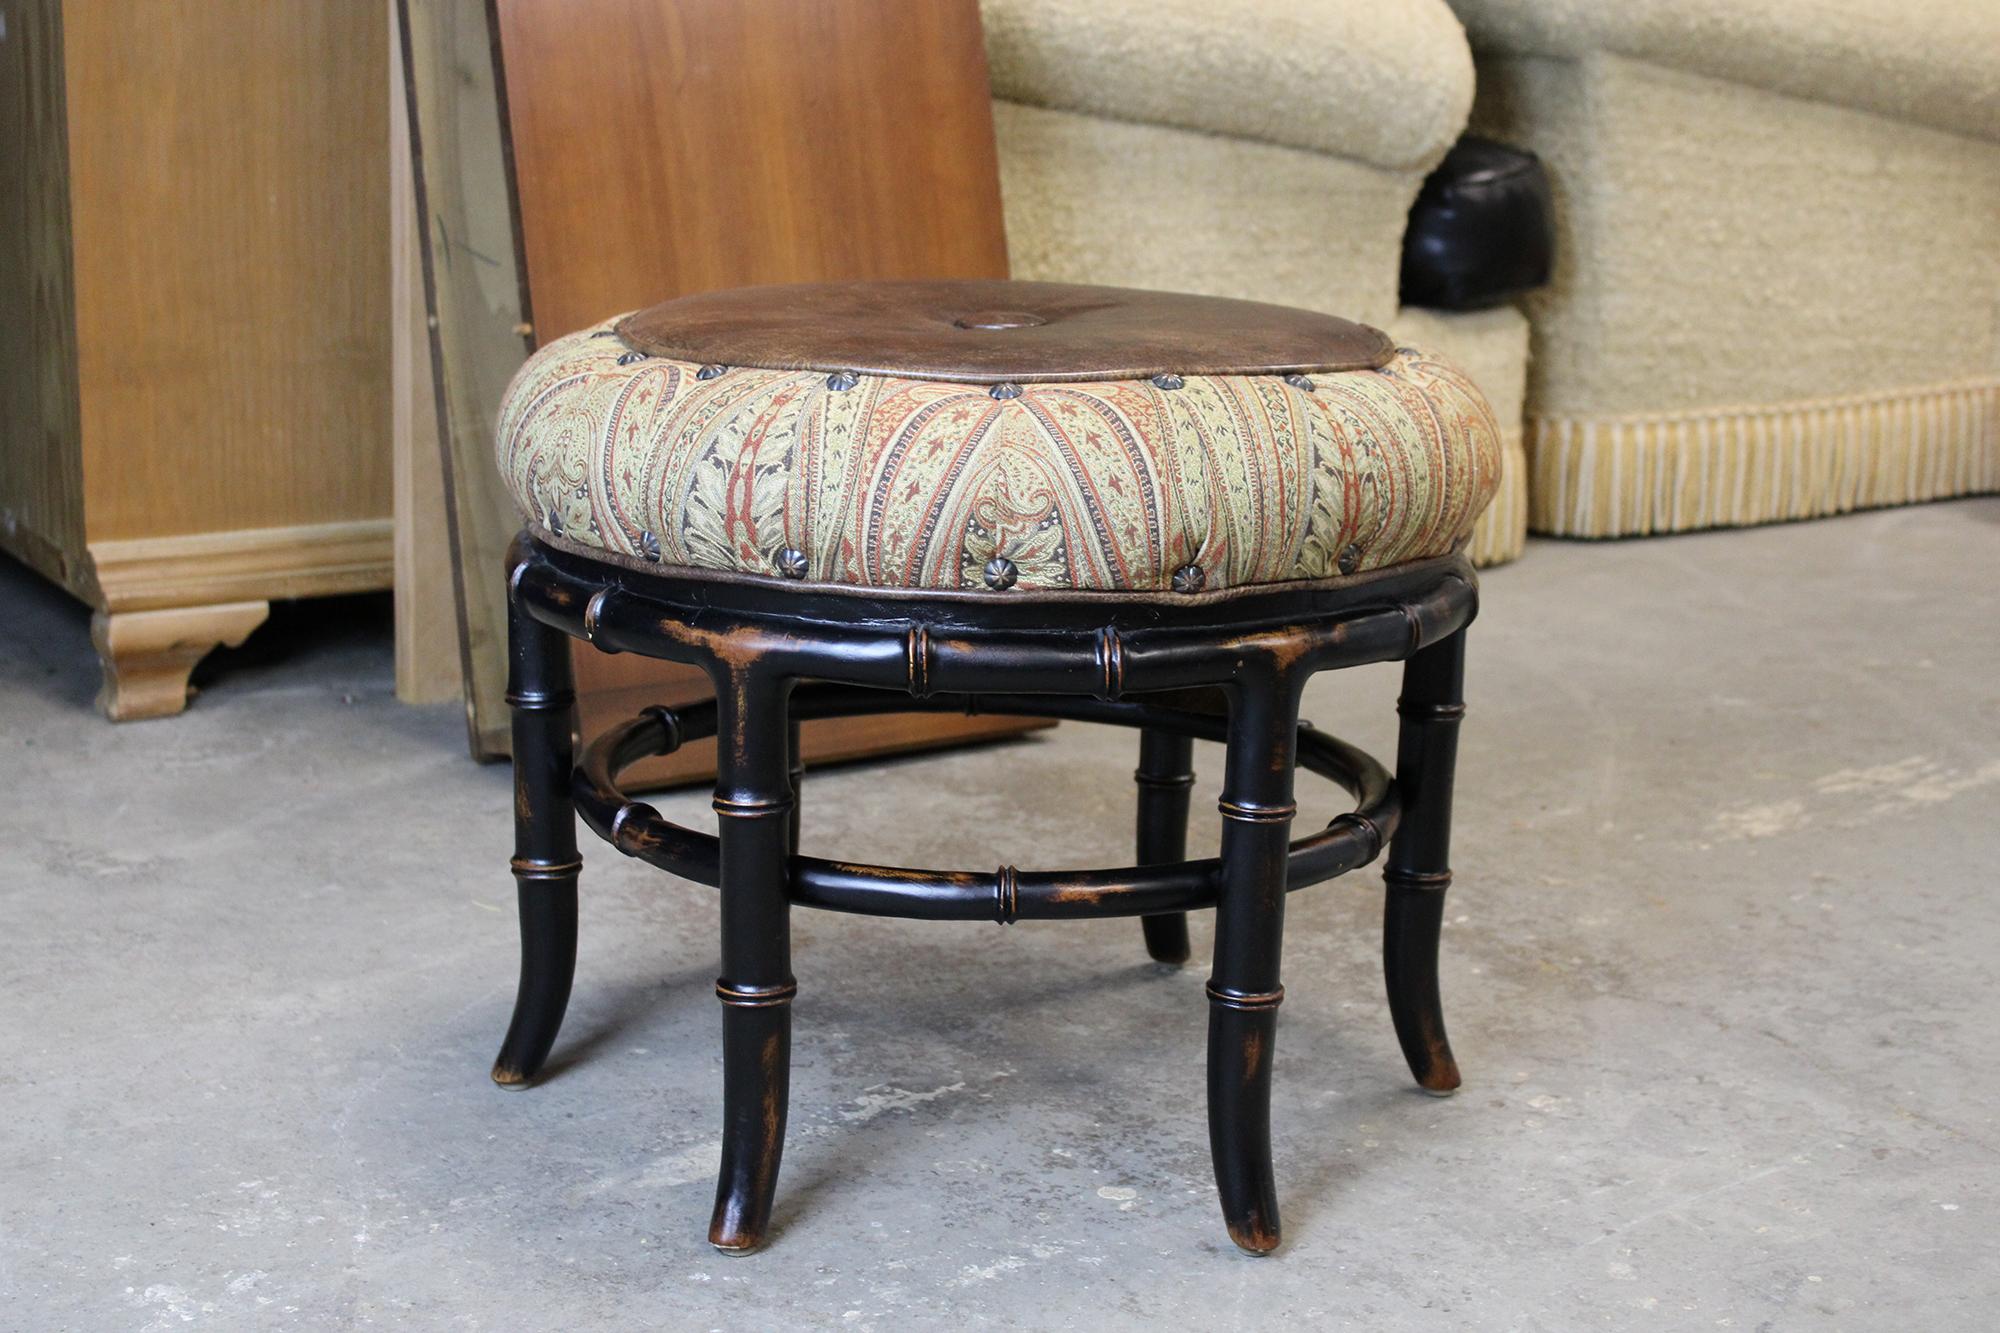 Vanguard Furniture Round Leather and Paisley Faux Bamboo Ottoman Bench Pouf 3